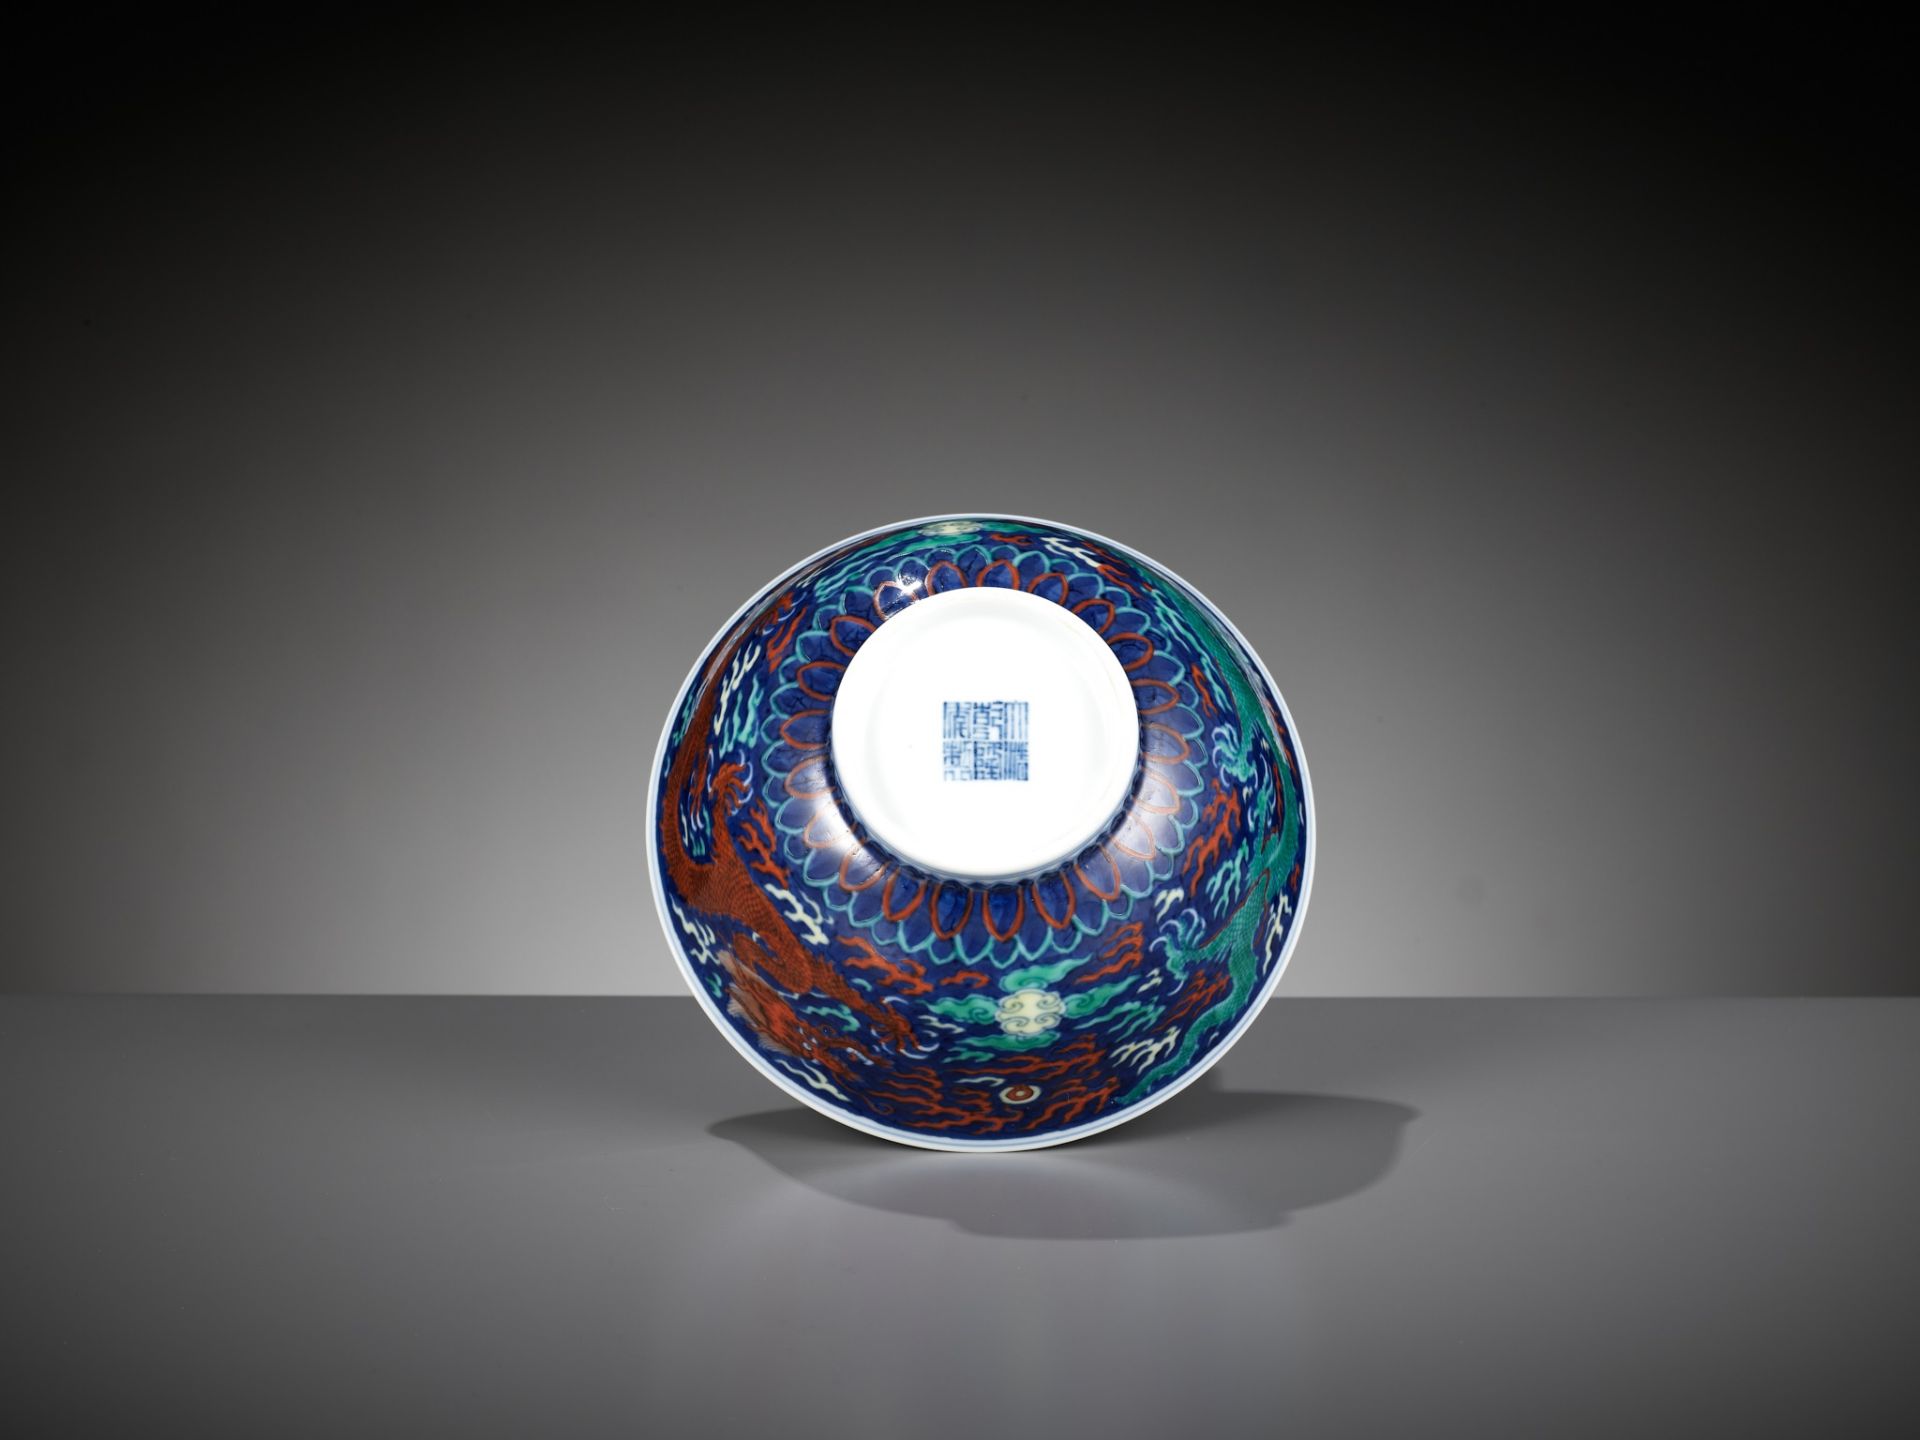 A RARE BLUE-GROUND POLYCHROME-DECORATED 'DRAGON' BOWL, QIANLONG MARK AND PERIOD - Image 17 of 19